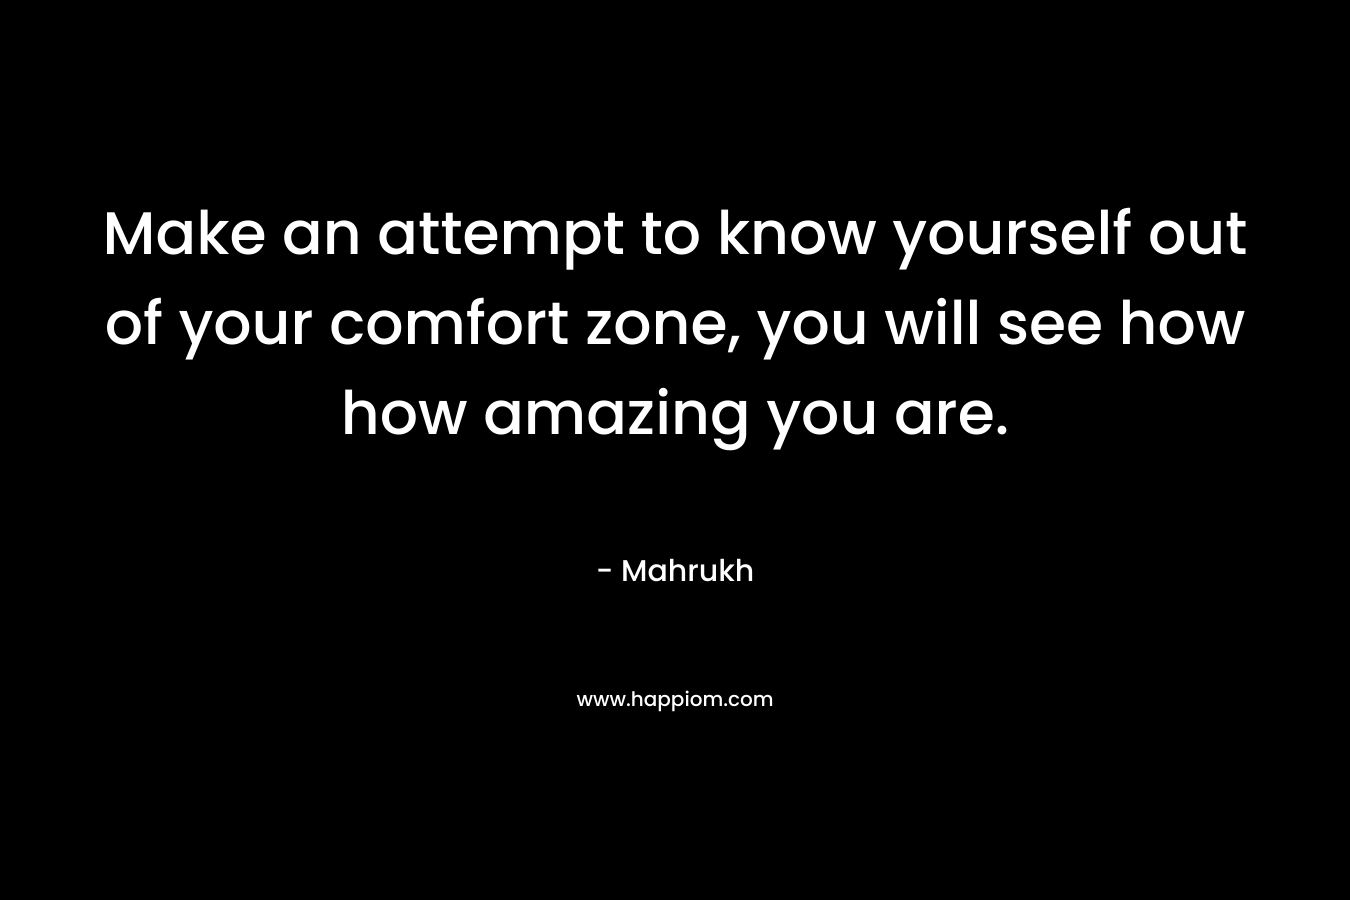 Make an attempt to know yourself out of your comfort zone, you will see how how amazing you are.